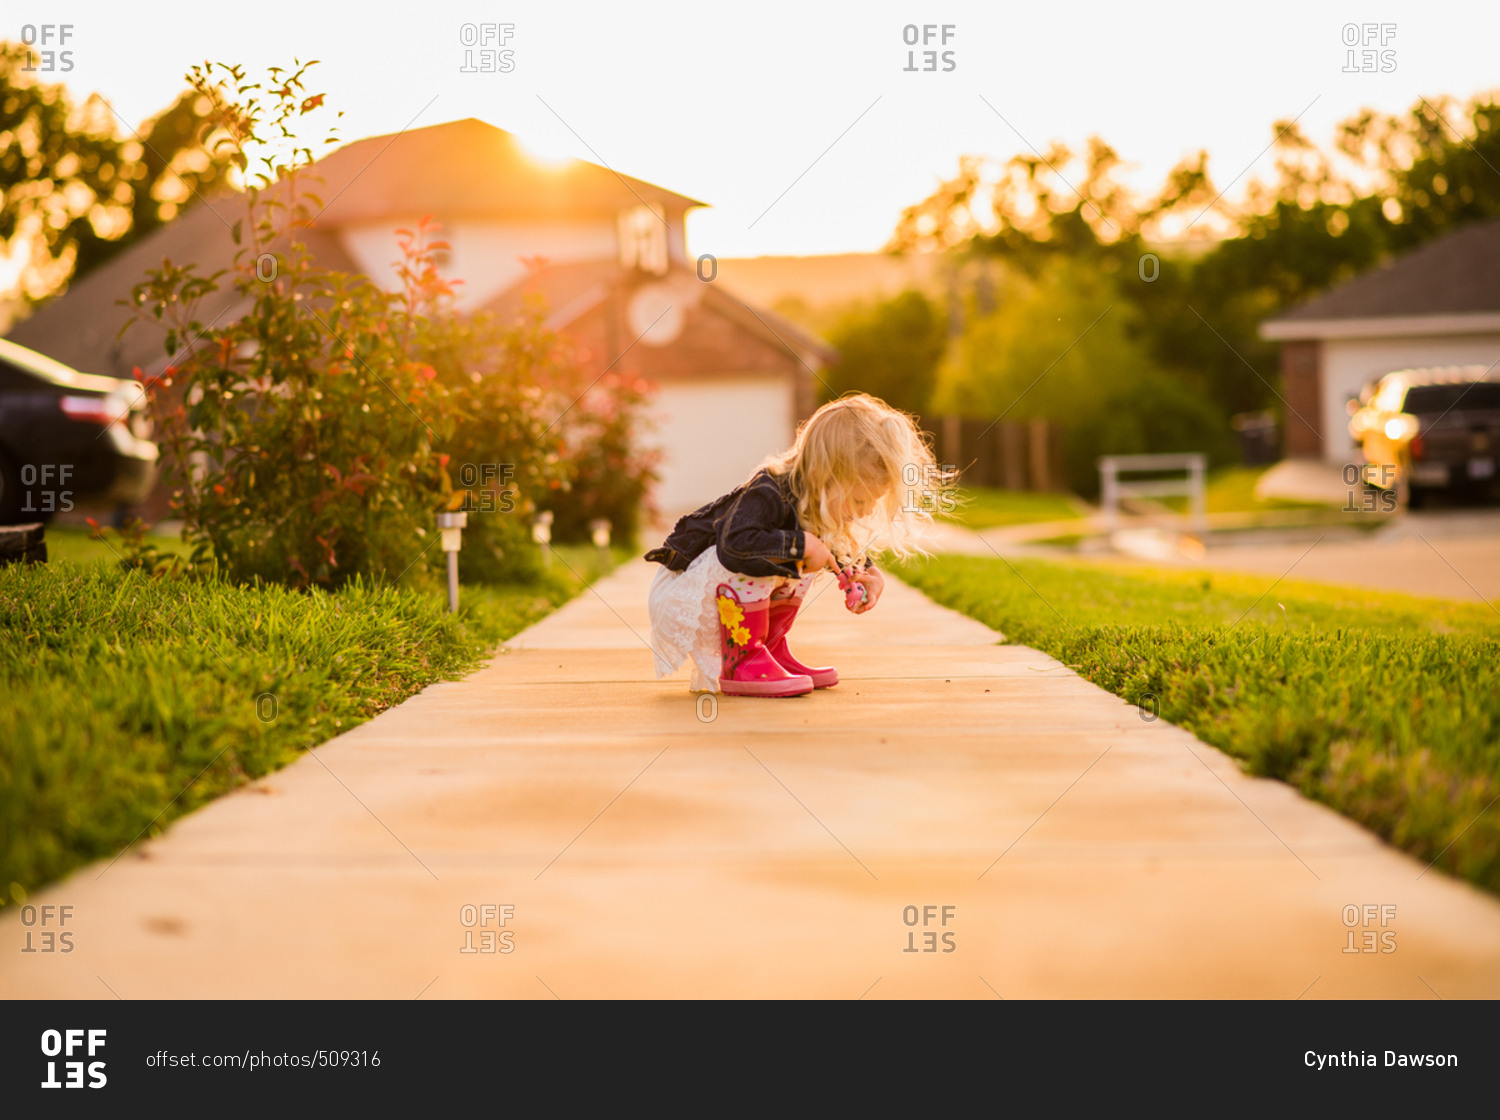 Girl watching insects on sidewalk